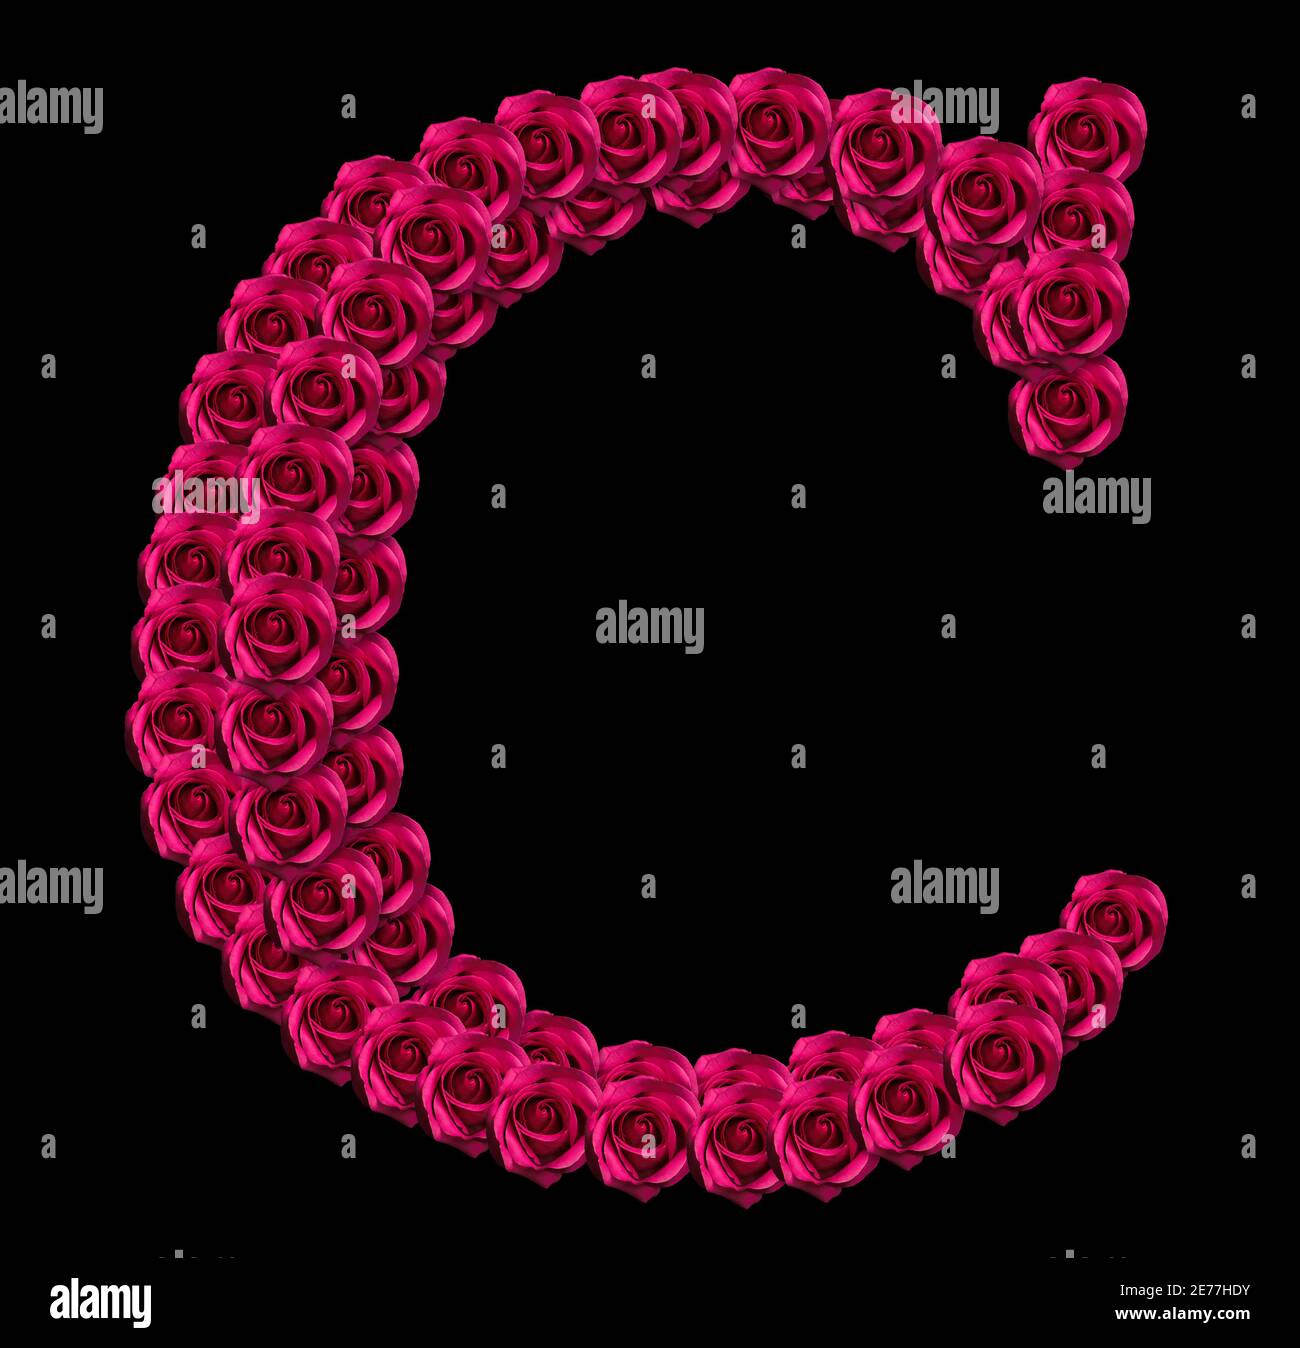 romantic concept image of a capital letter C made of red roses. Isolated on black background. Design element for love or valentines themes Stock Photo